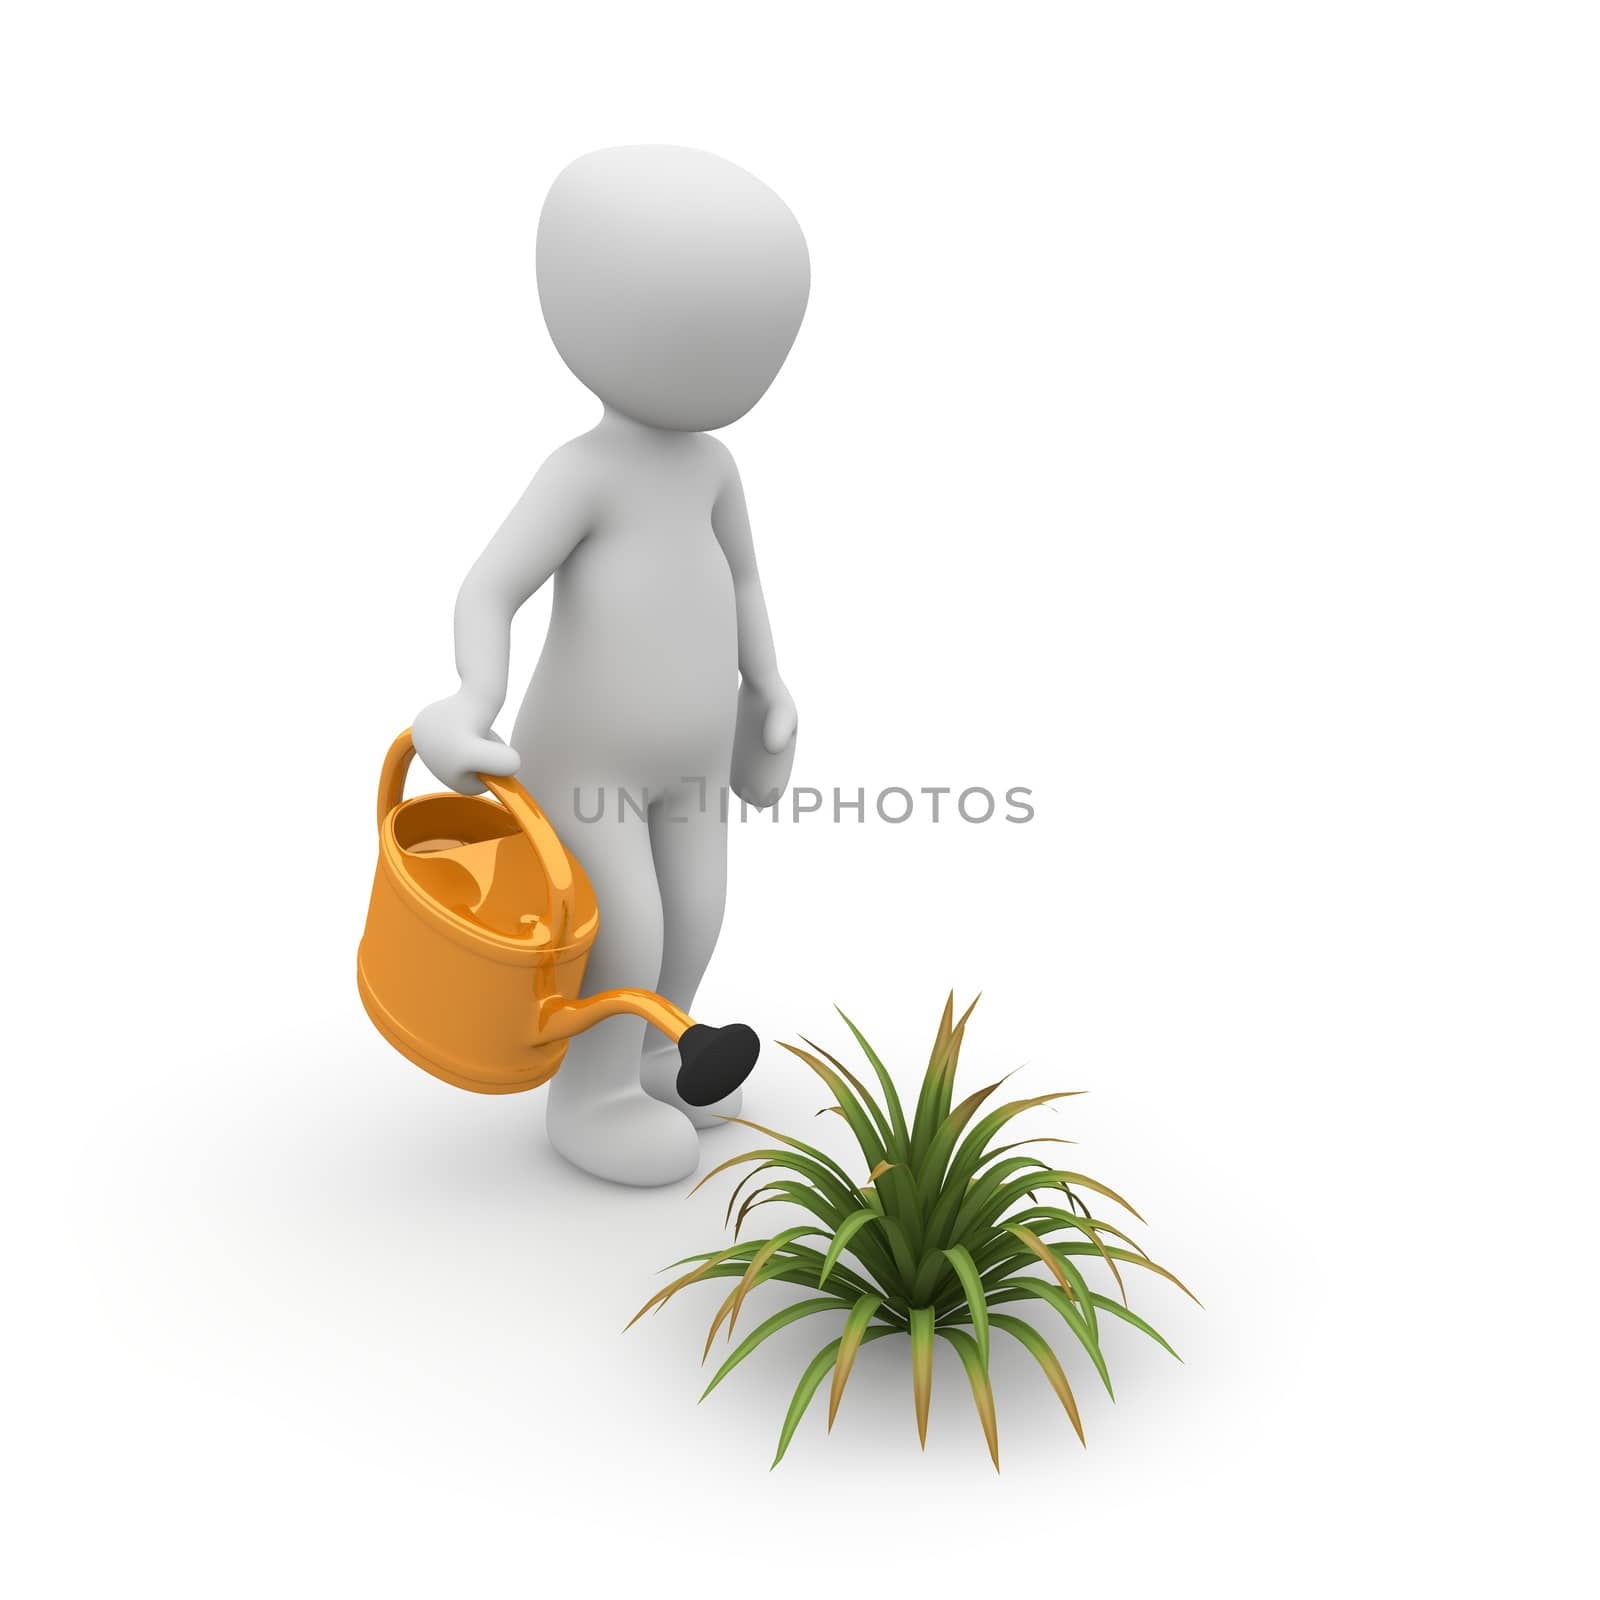 A character pours a plant with a watering can.